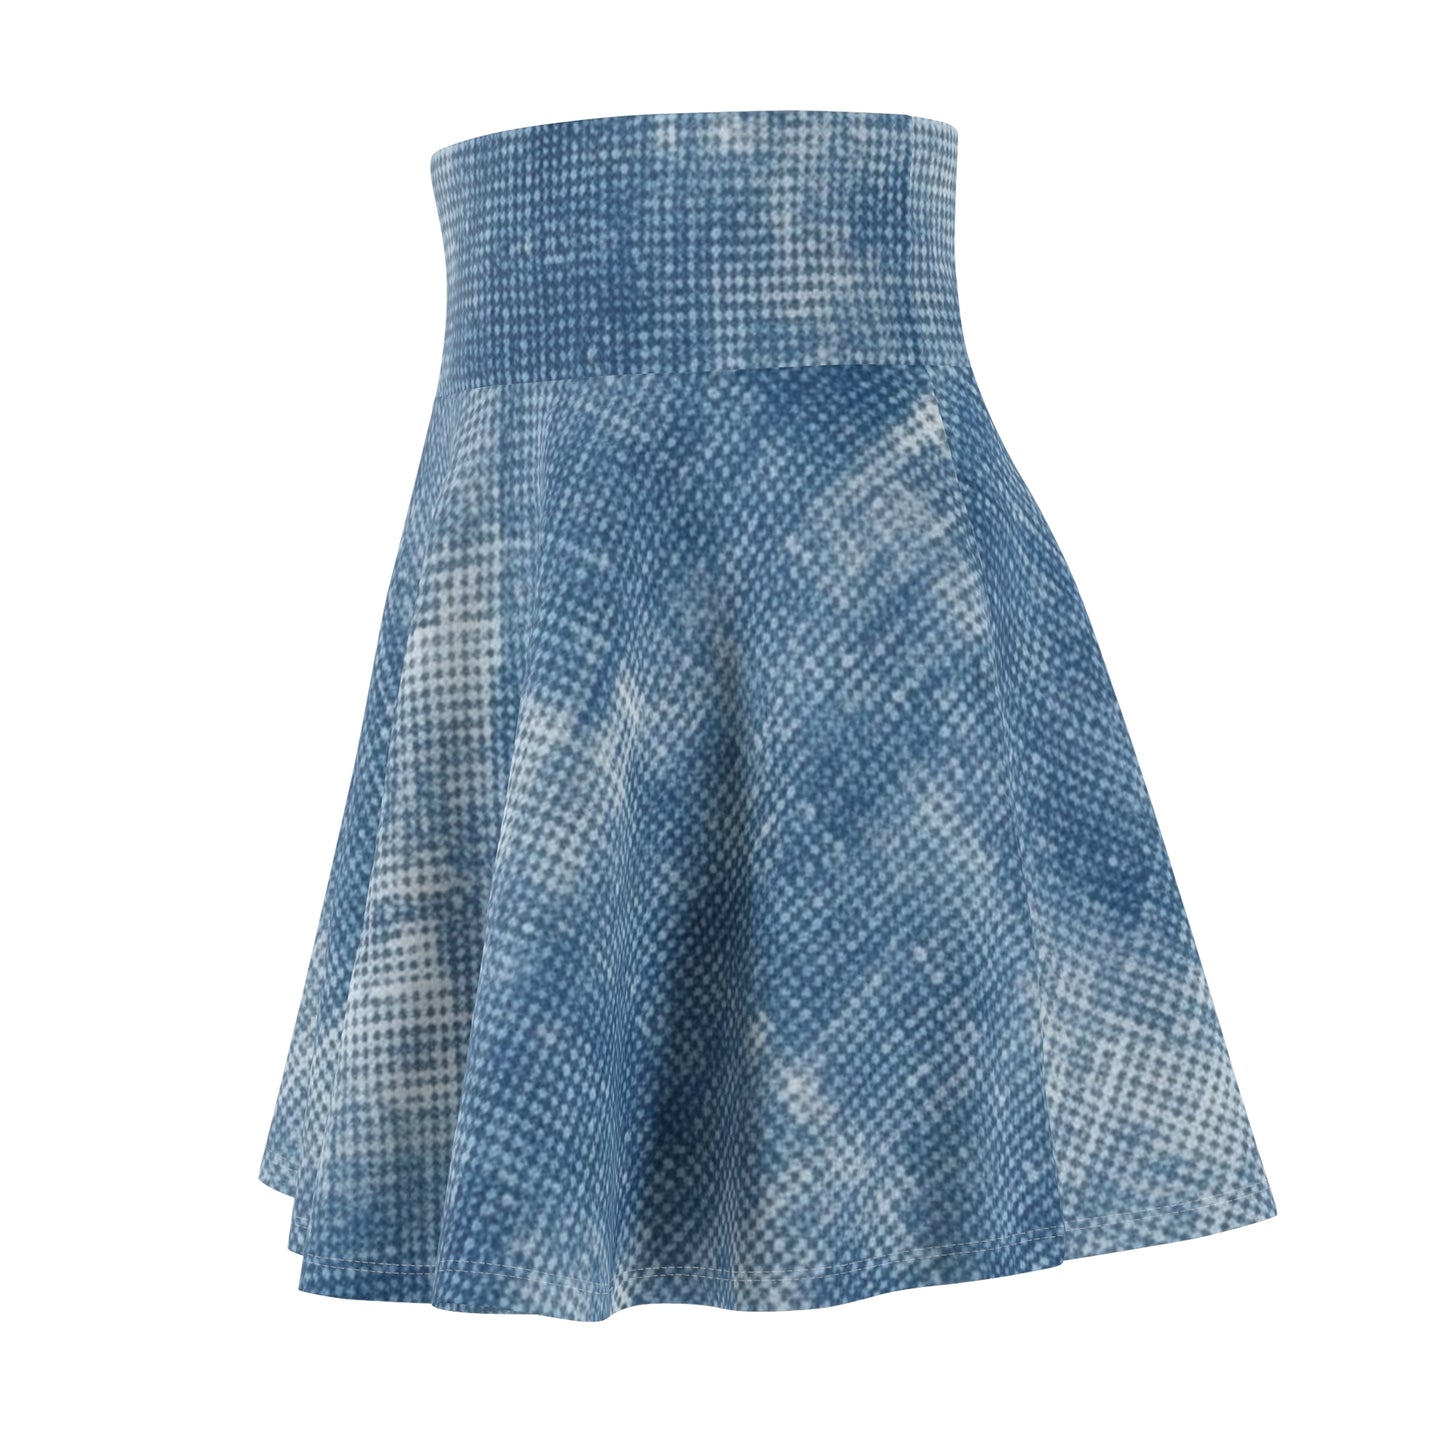 Faded Blue Washed-Out: Denim-Inspired, Style Fabric - Women's Skater Skirt (AOP)